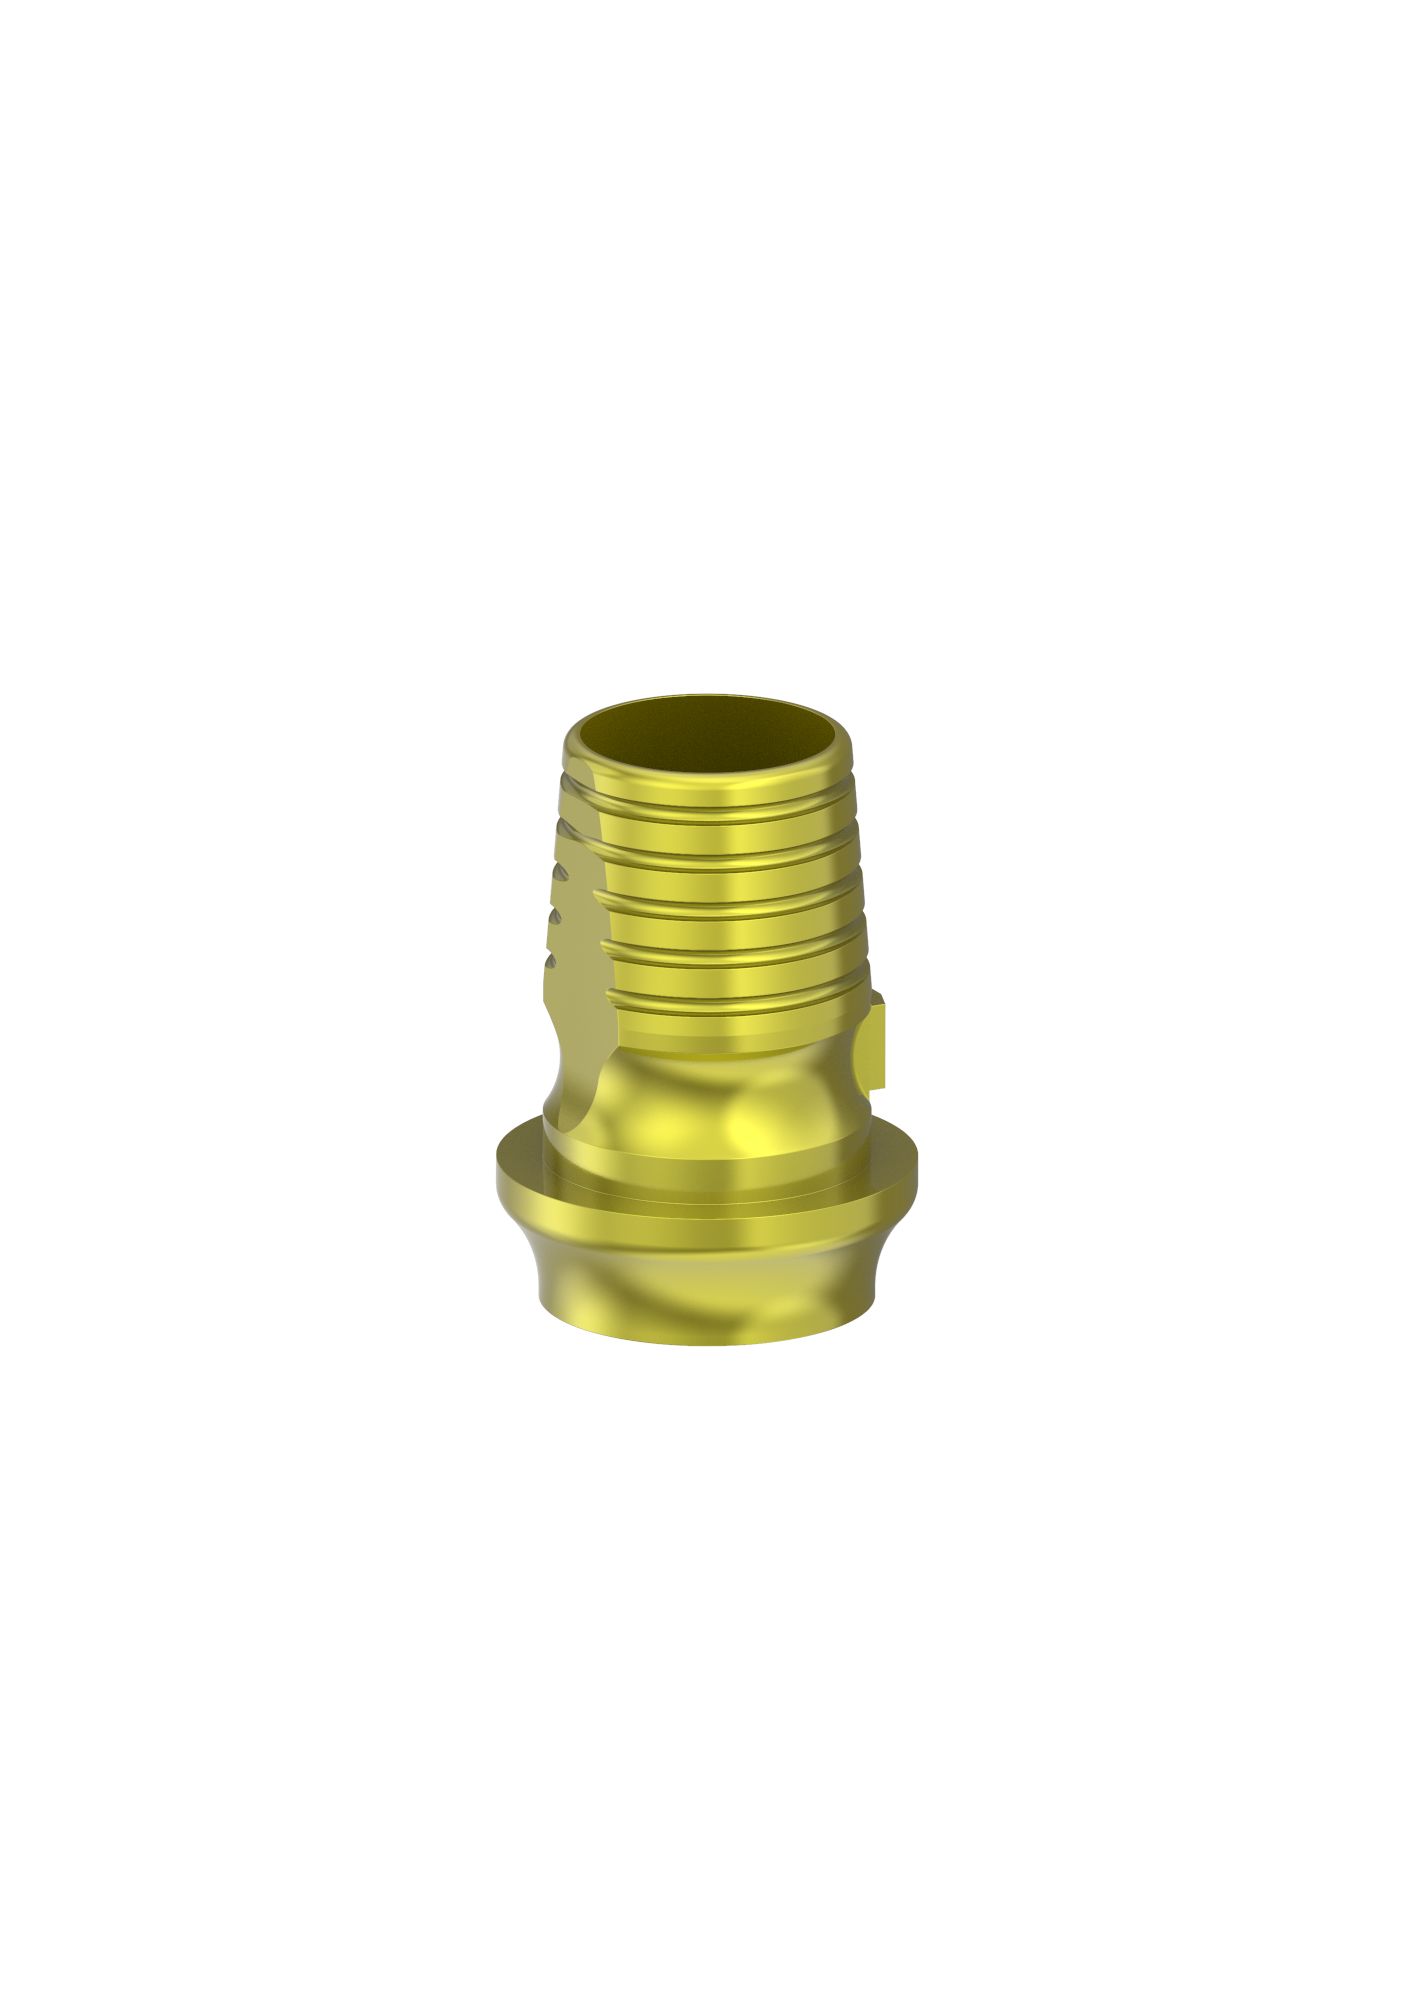 Ext Hex Abutment Base Ti 3.25, 1.5mm Collar Non-Engaging